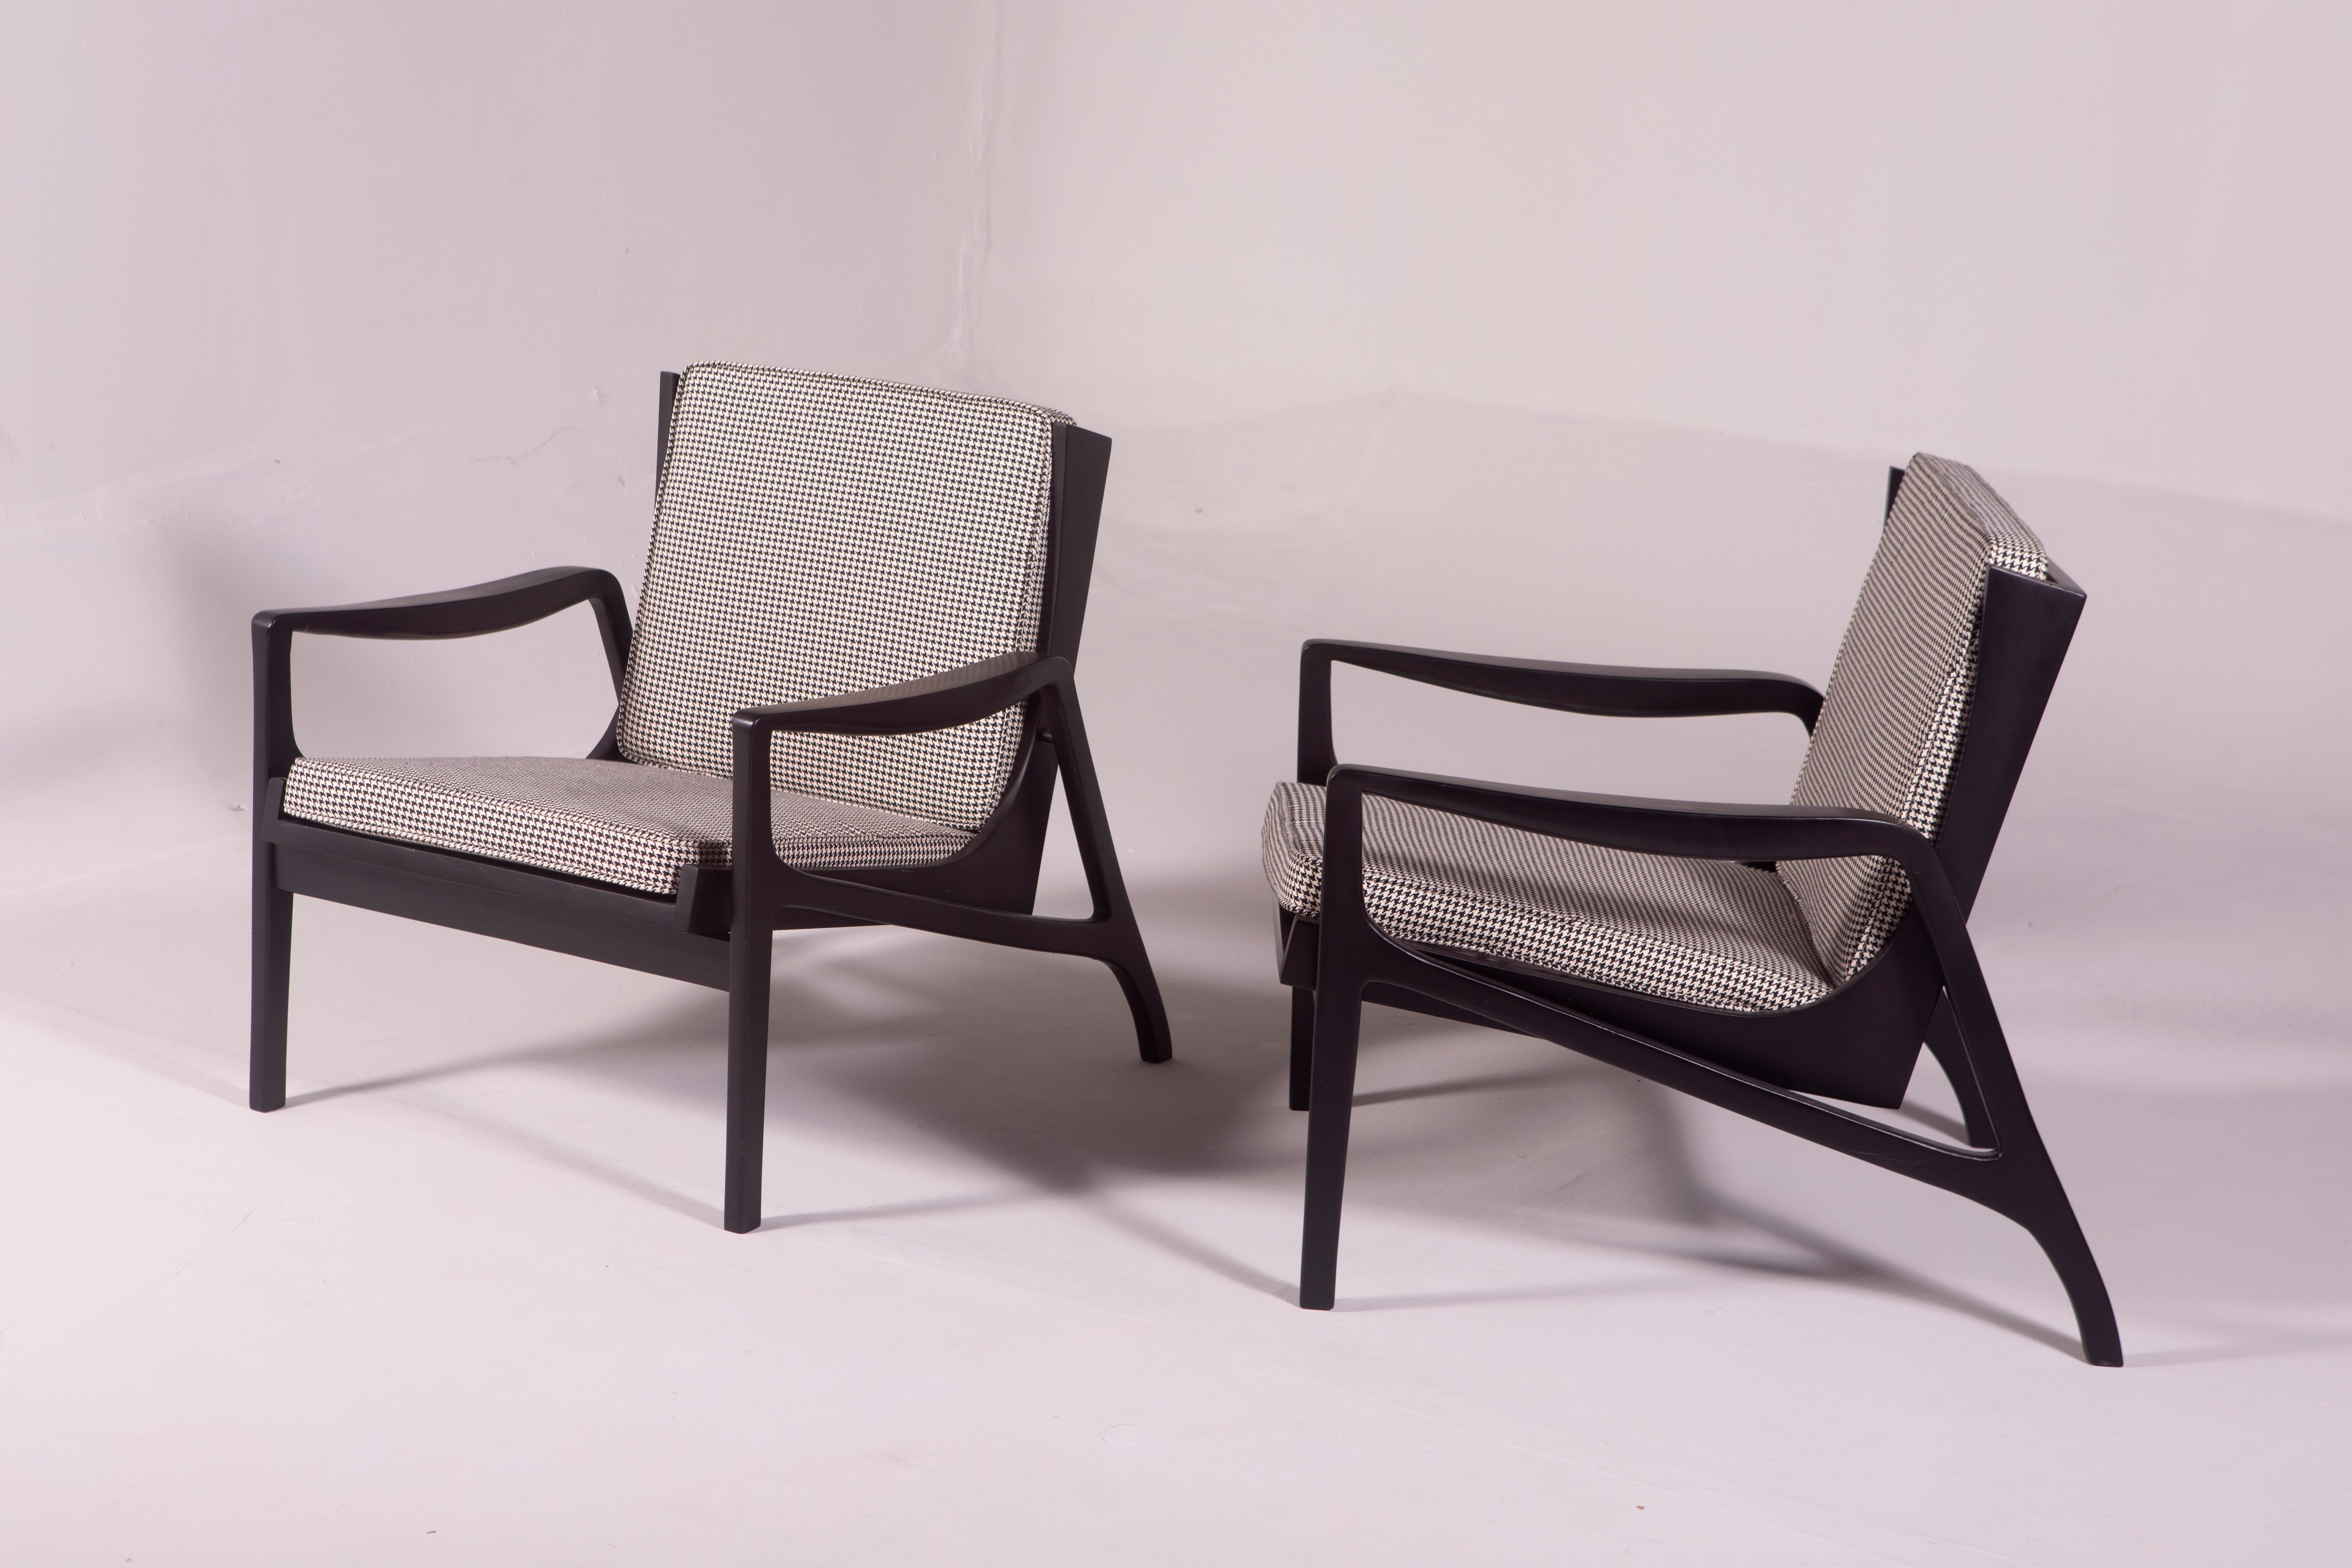 Mid-Century Modern Pair of Armchairs by Brazilian Designer, Brazil, 1970s

Armchair from the early 70s manufactured by an unidentified Brazilian designer.
Structure in ebonized solid wood, with its loose cushions covered in fabric with black and